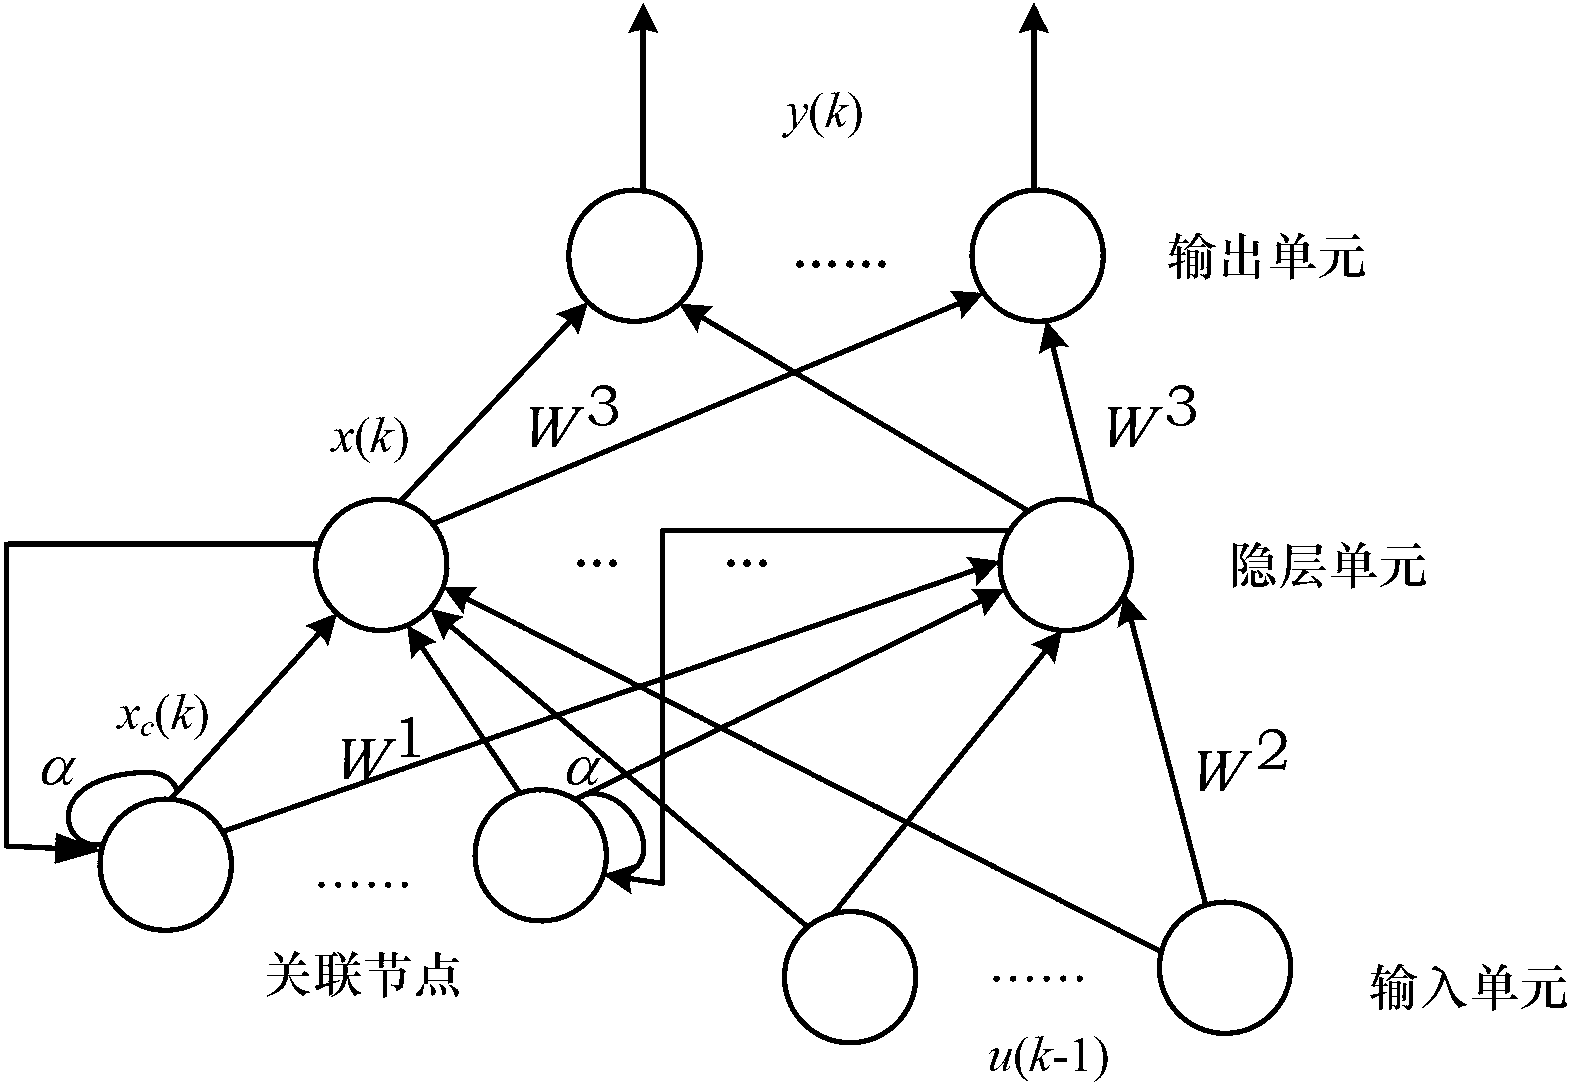 Fault location method based on residual and double-stage Elman neural network for hydraulic servo system